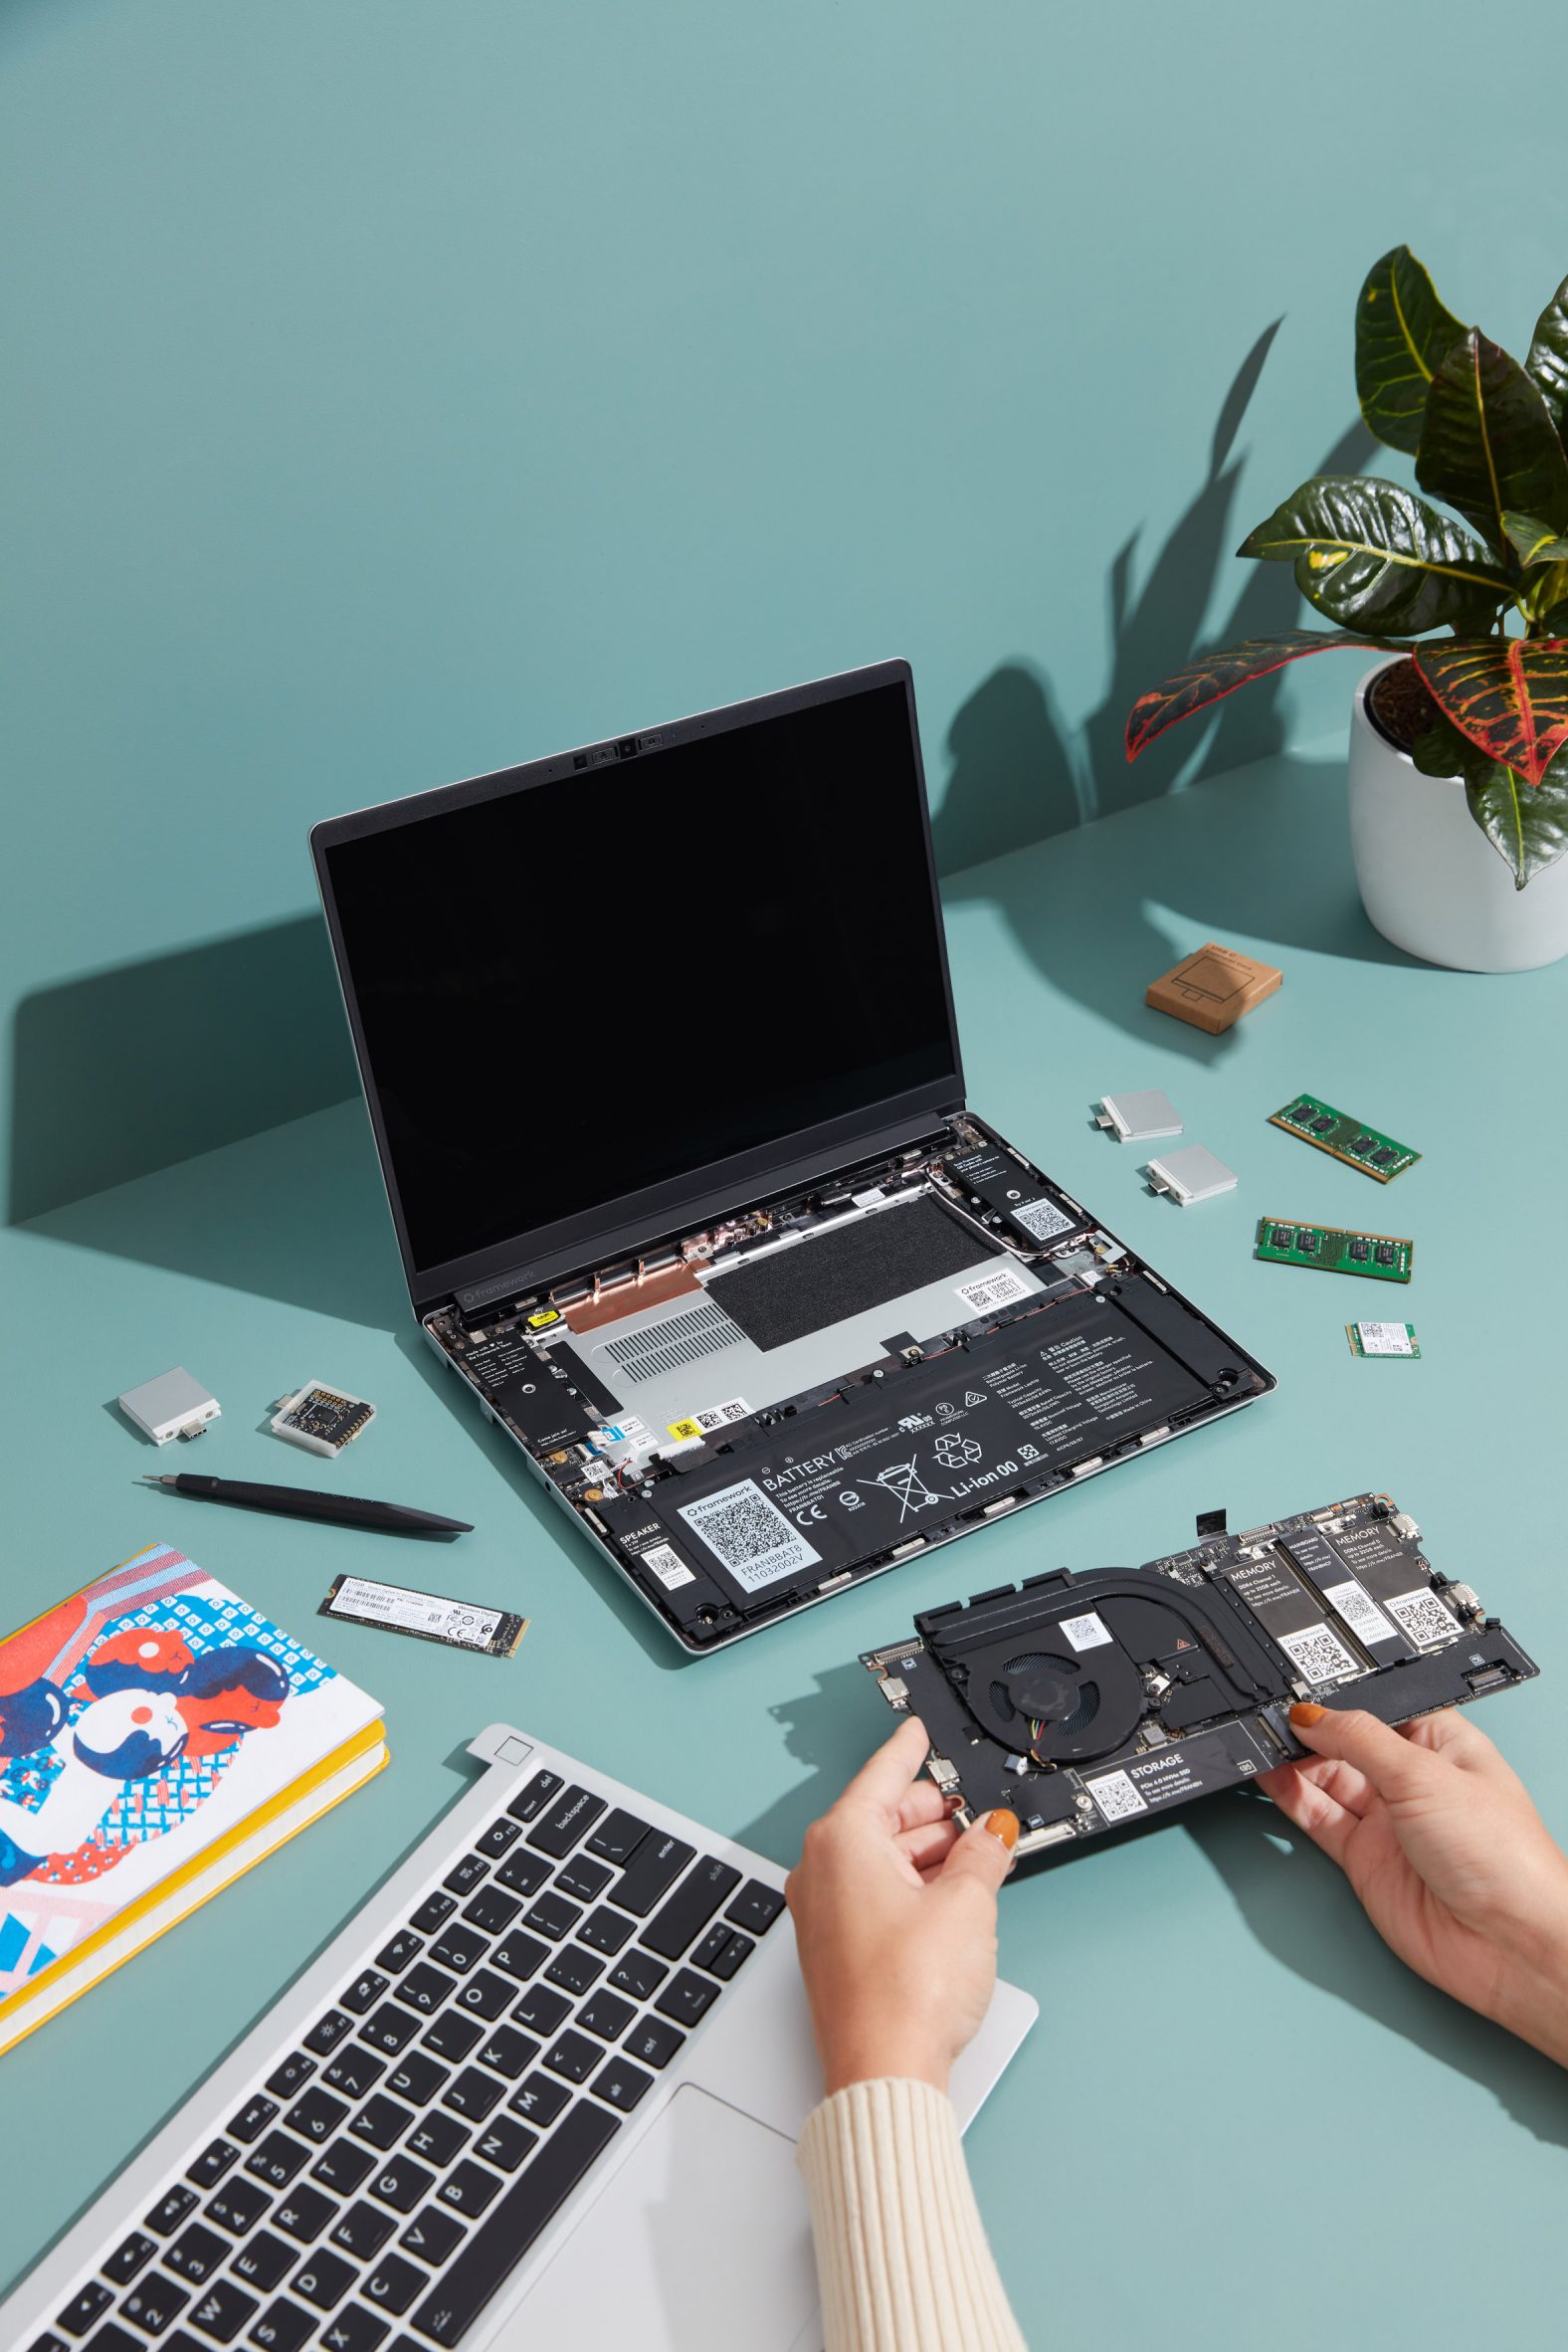 Framework develops modular laptop that users can fix and upgrade